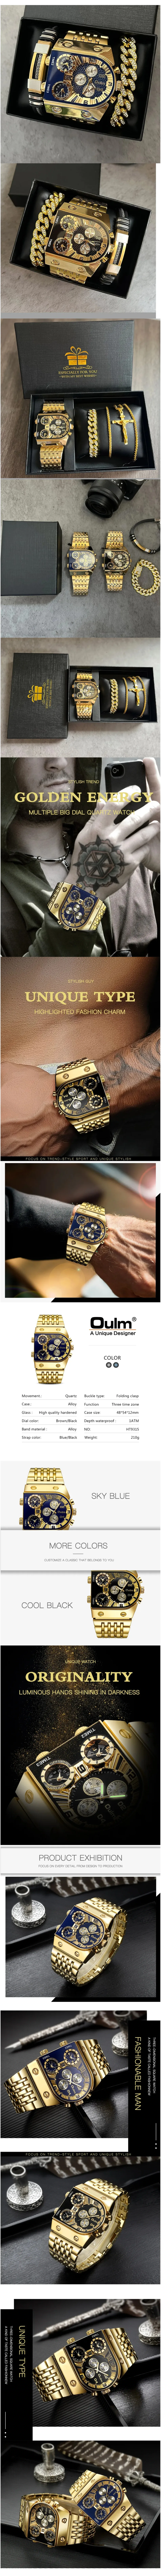 Oulm Men’s Watch - Front View